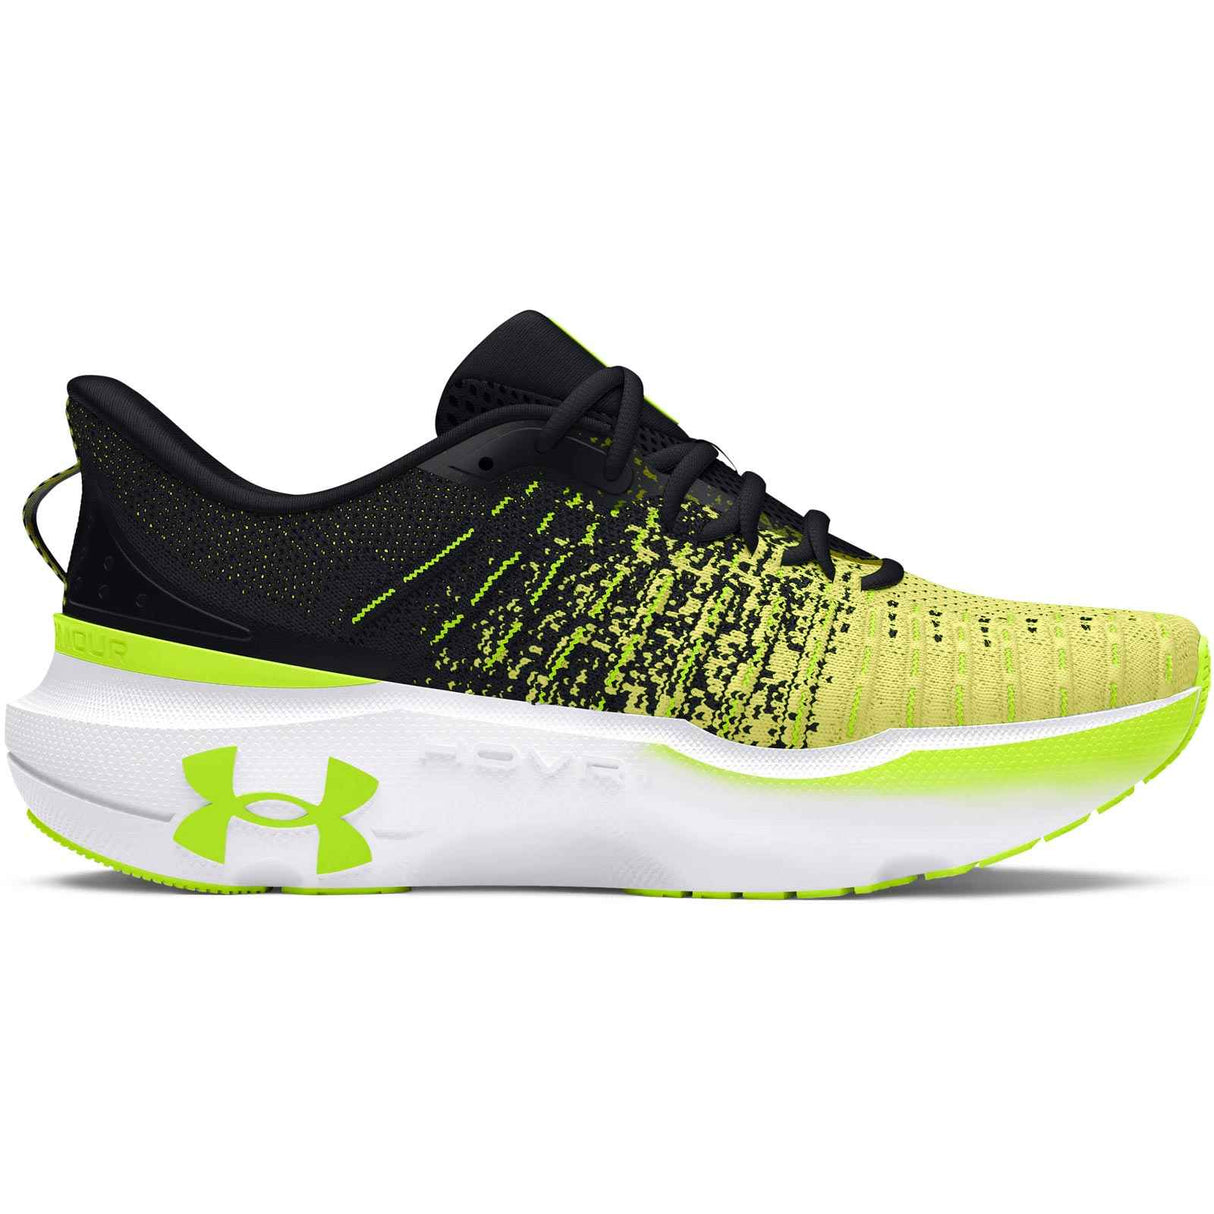 Under Armour Infinite Elite Womens Running Shoes